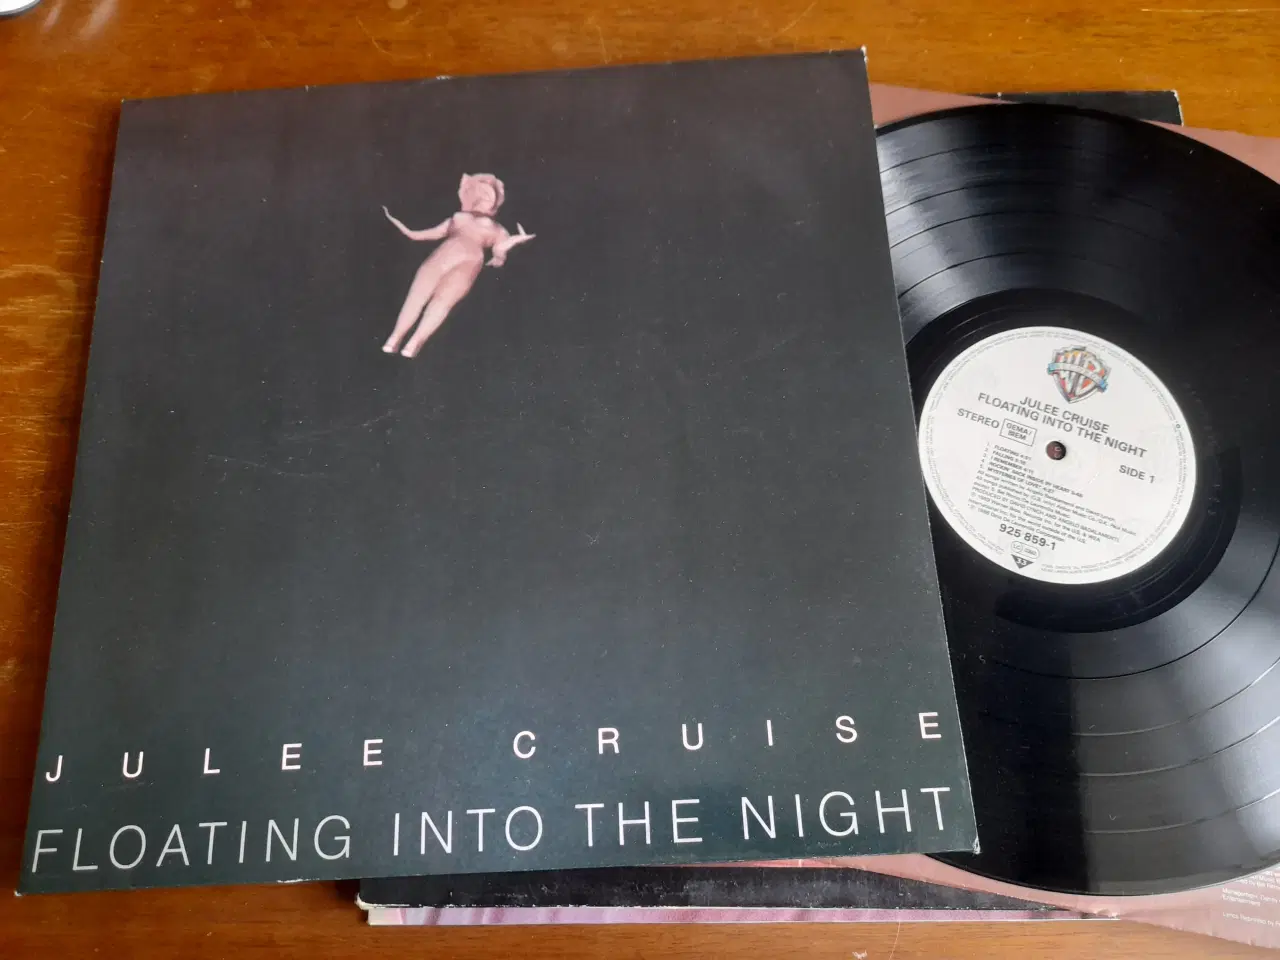 Billede 1 - Julee Cruise - Floating Into The Night (NY PRIS)